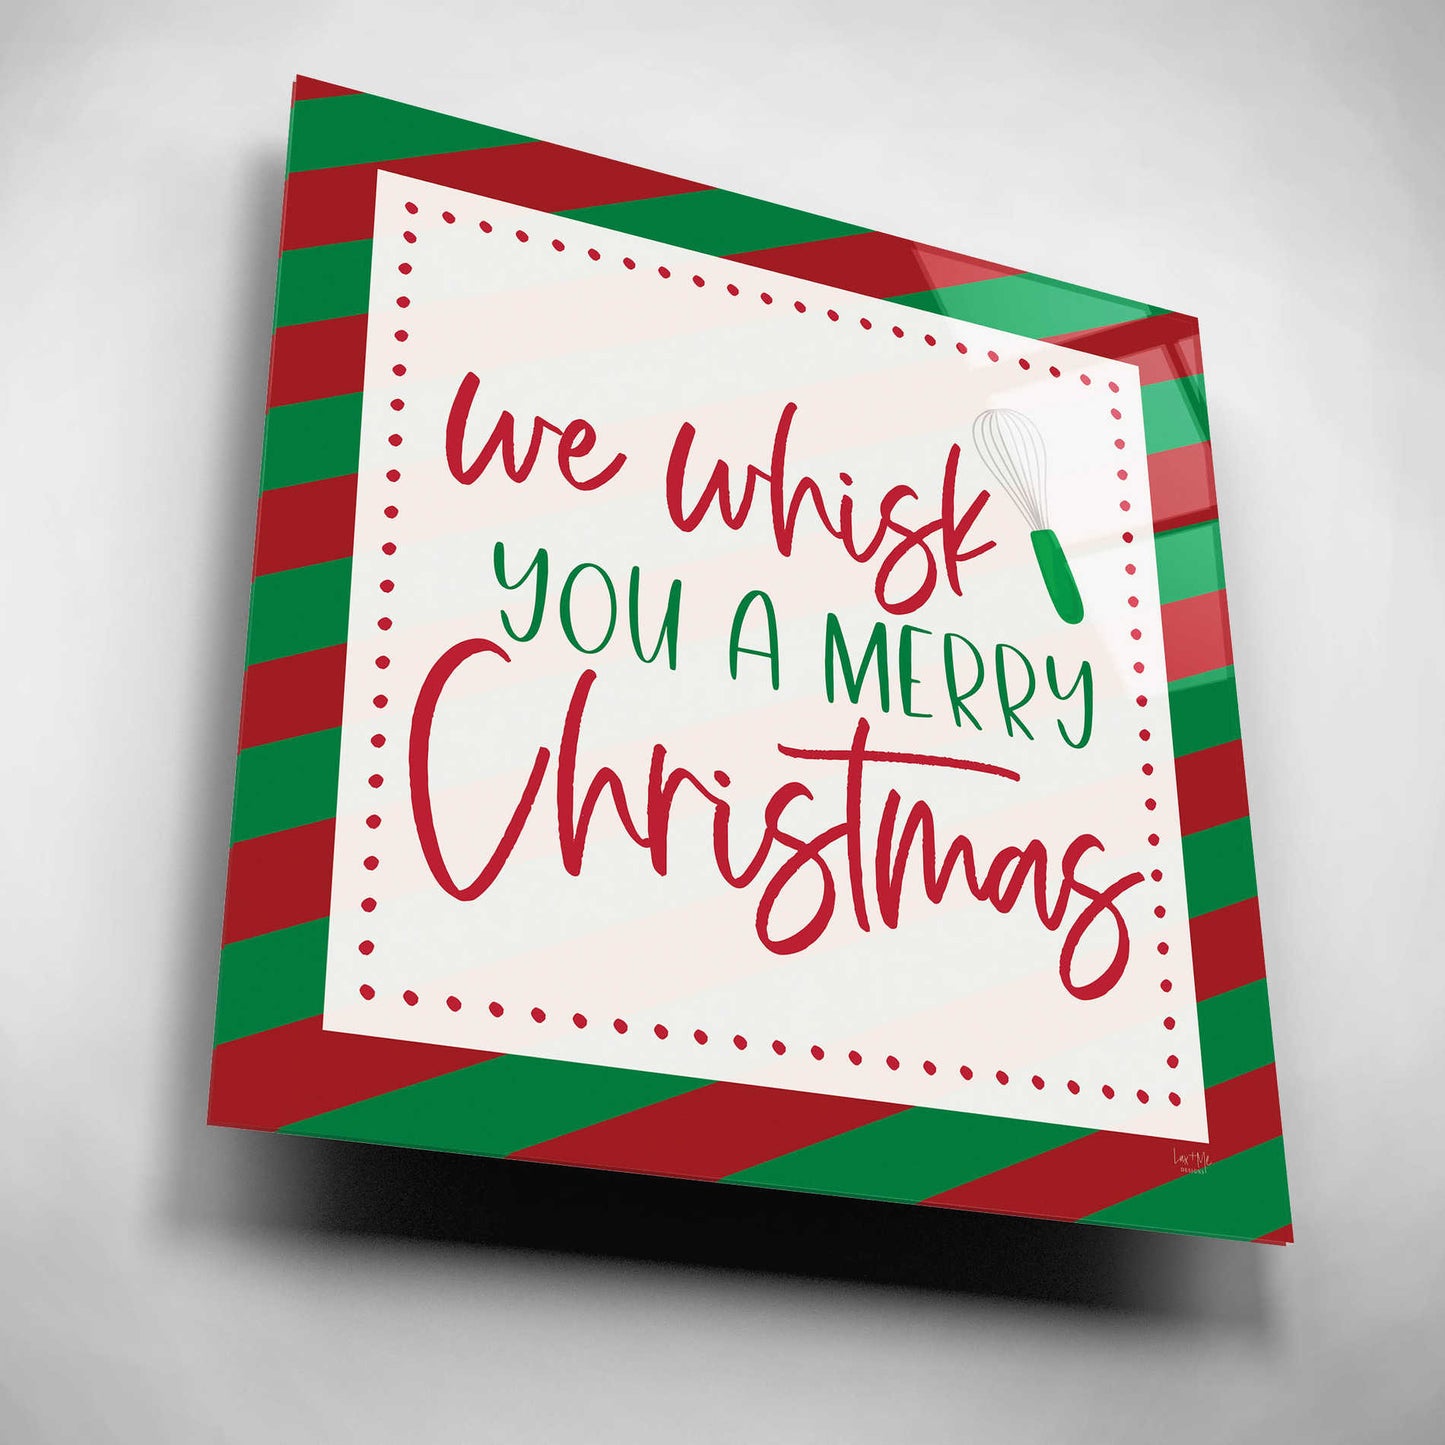 Epic Art 'We Wisk You a Merry Christmas' by Lux + Me, Acrylic Glass Wall Art,12x12